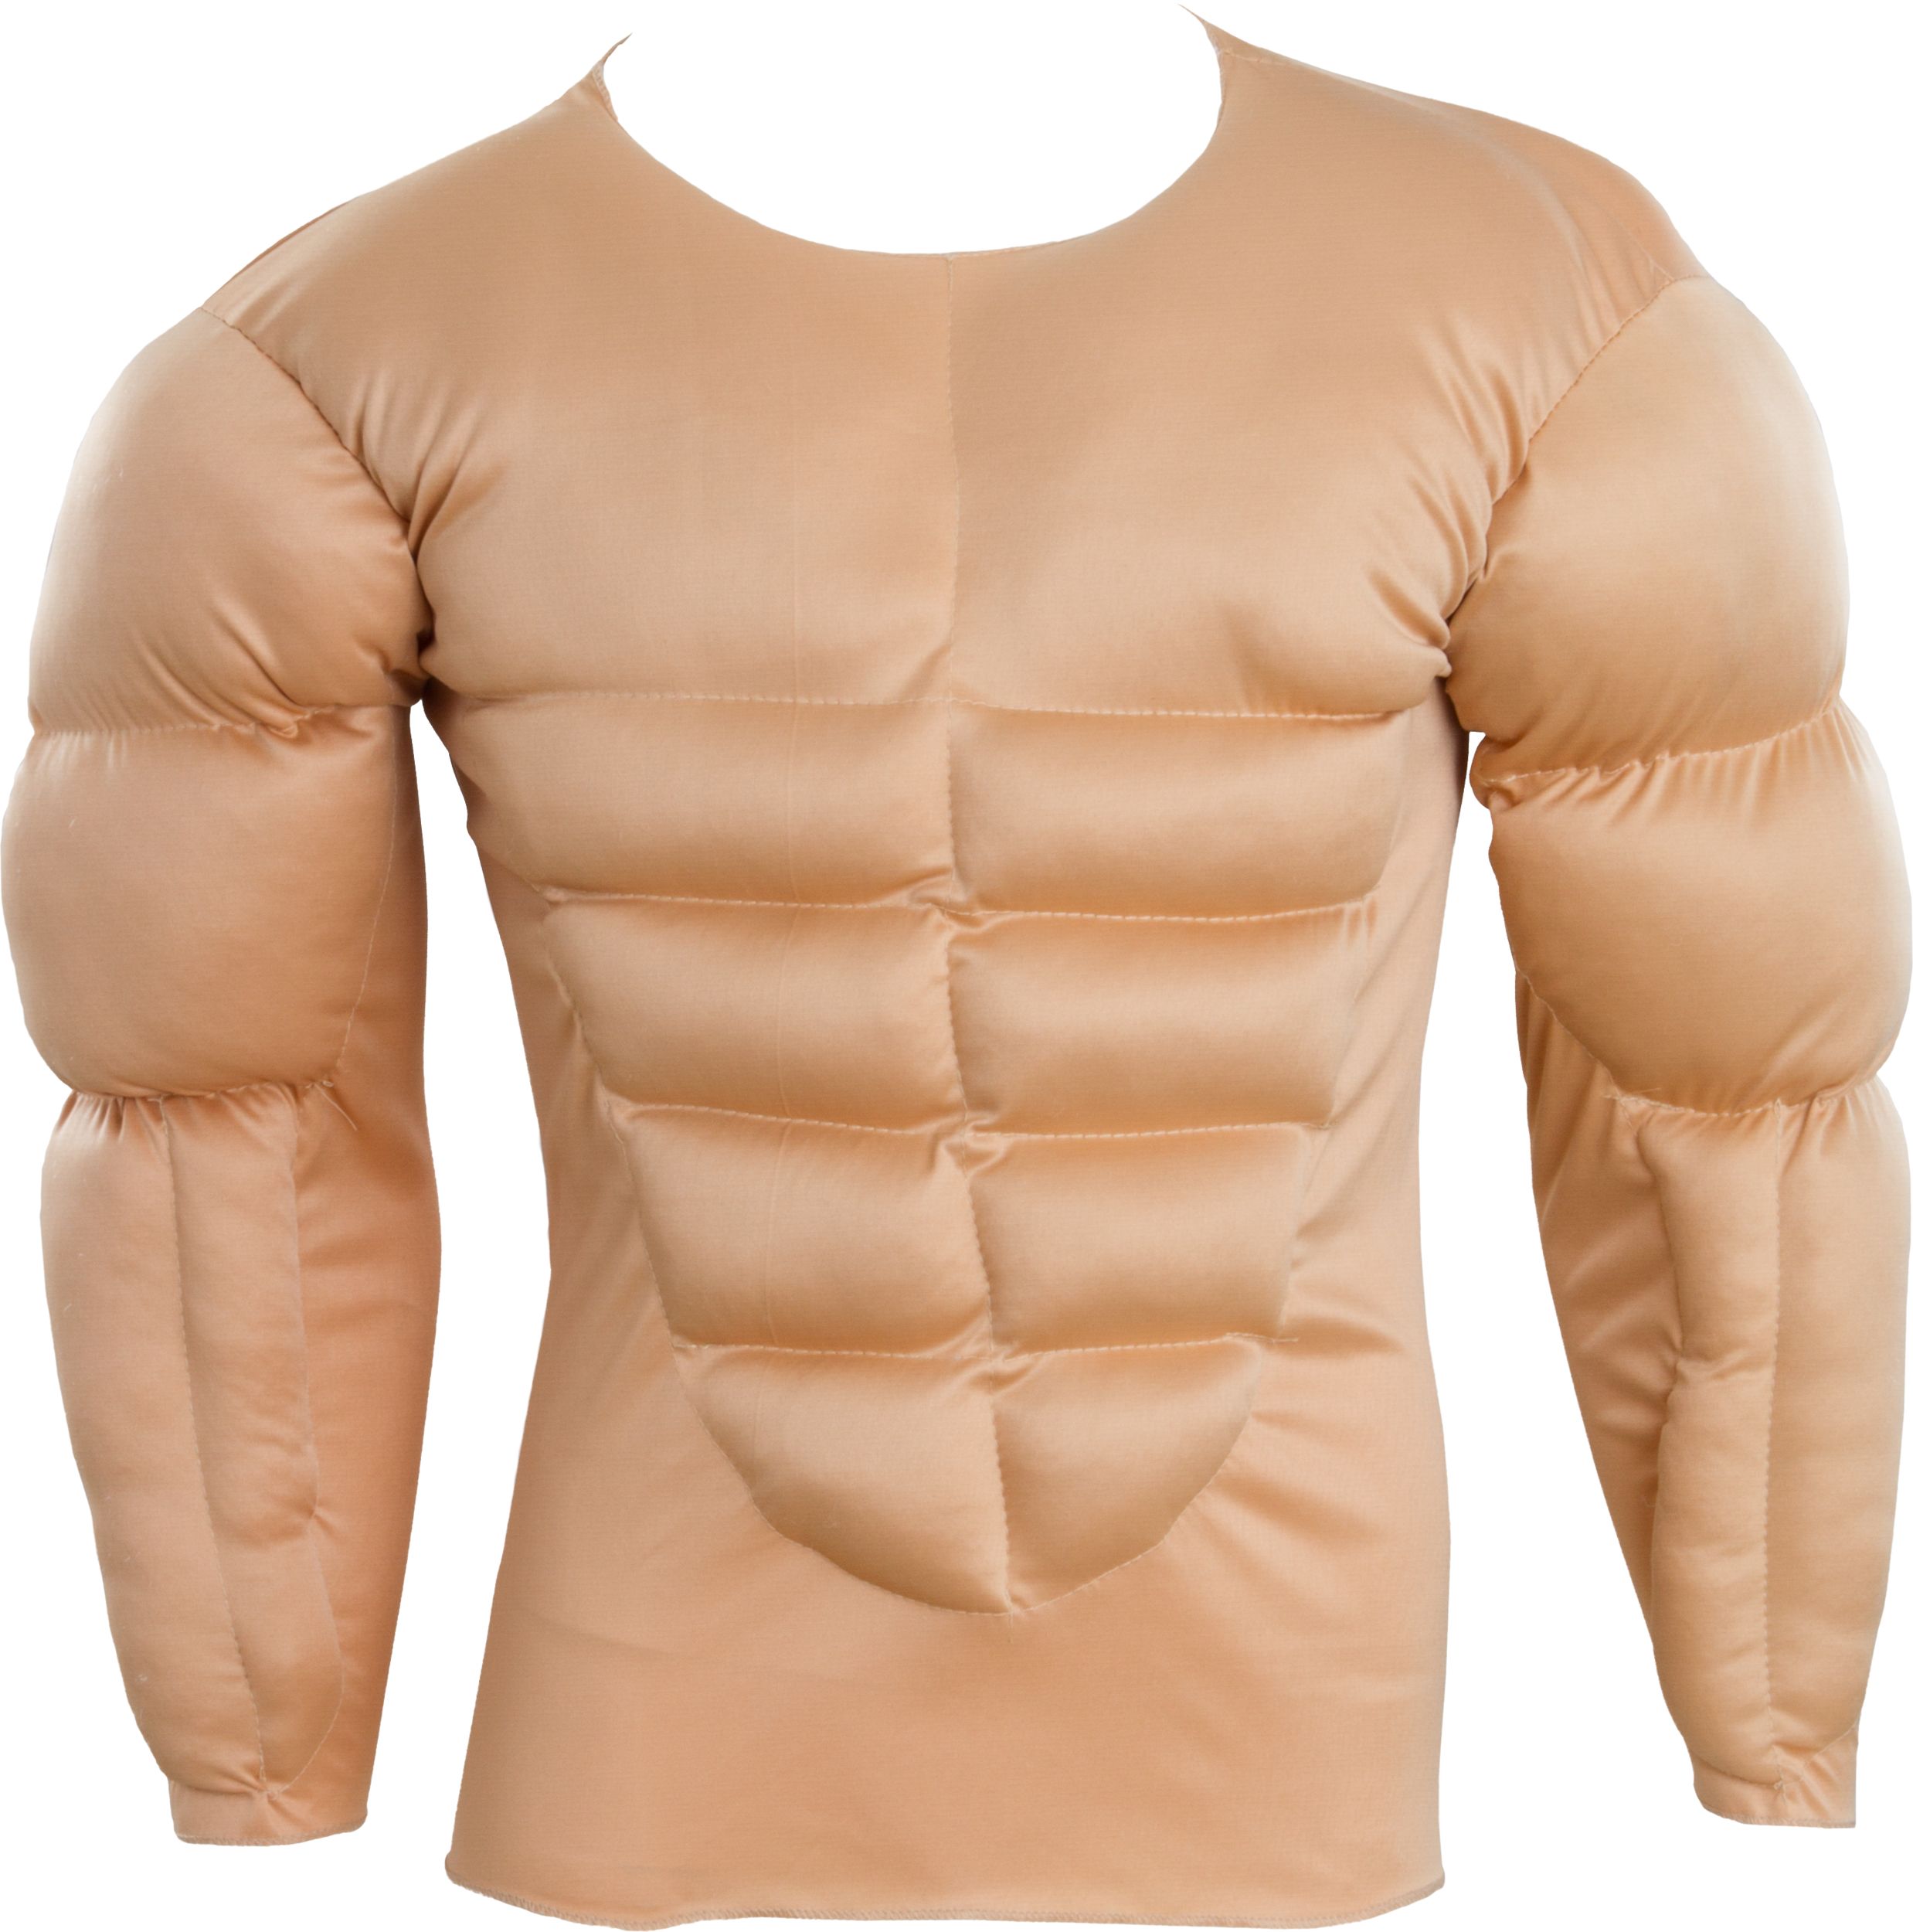 Adult Padded Muscle Long Sleeve Shirt, Beige, One Size, Wearable Costume  Accessory for Halloween